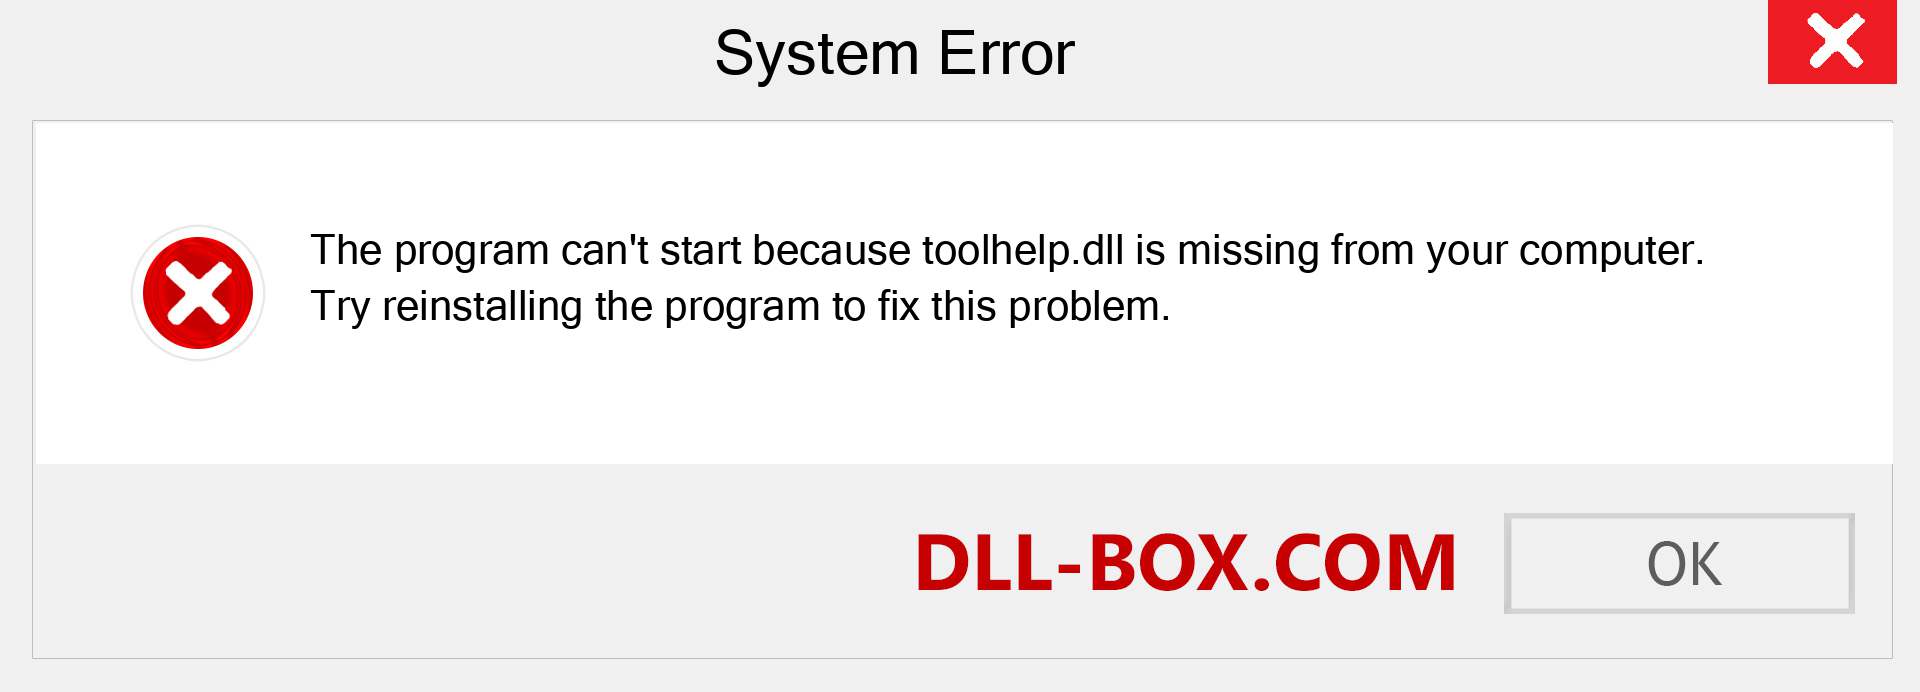  toolhelp.dll file is missing?. Download for Windows 7, 8, 10 - Fix  toolhelp dll Missing Error on Windows, photos, images